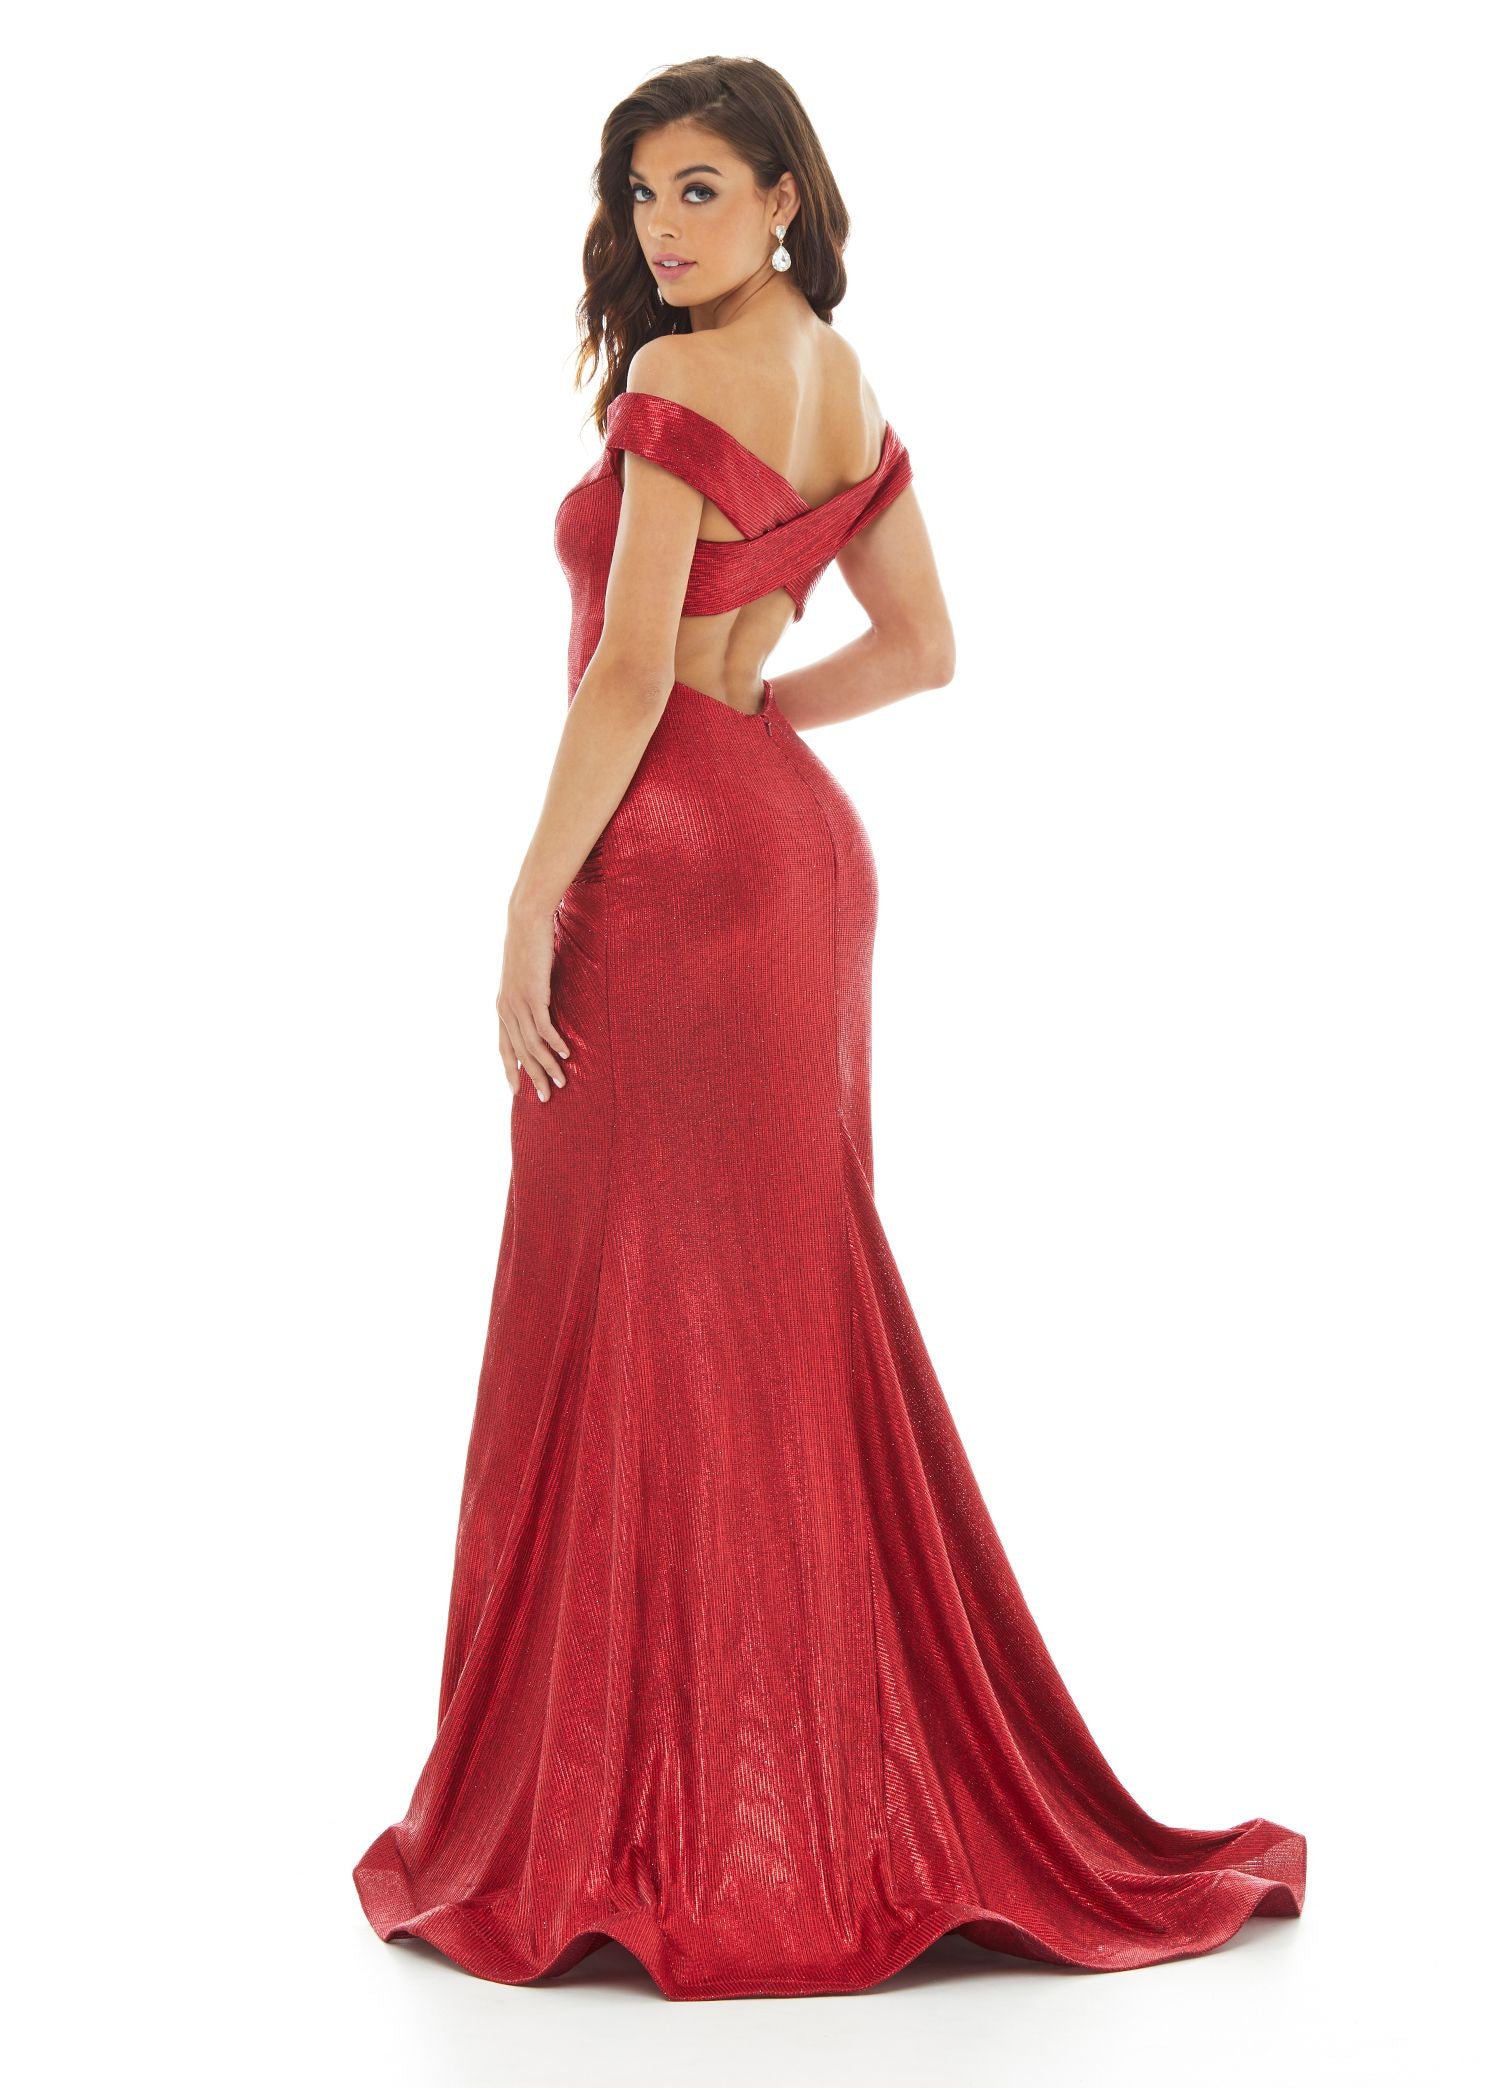 Ashley Lauren 11006 This metallic jersey off the shoulder evening gown is perfect for your next Prom or Pageant. The hip is accentuated with a twist knot detail that gives way to a high left leg slit. The skirt is finished with horsehair.   Colors Gunmetal, Red  Sizes 0, 2, 4, 6, 8, 10, 12, 14, 16    Off Shoulder Twist Knot Detail Criss Cross Back Fitted Skirt Metallic Jersey Prom Dress